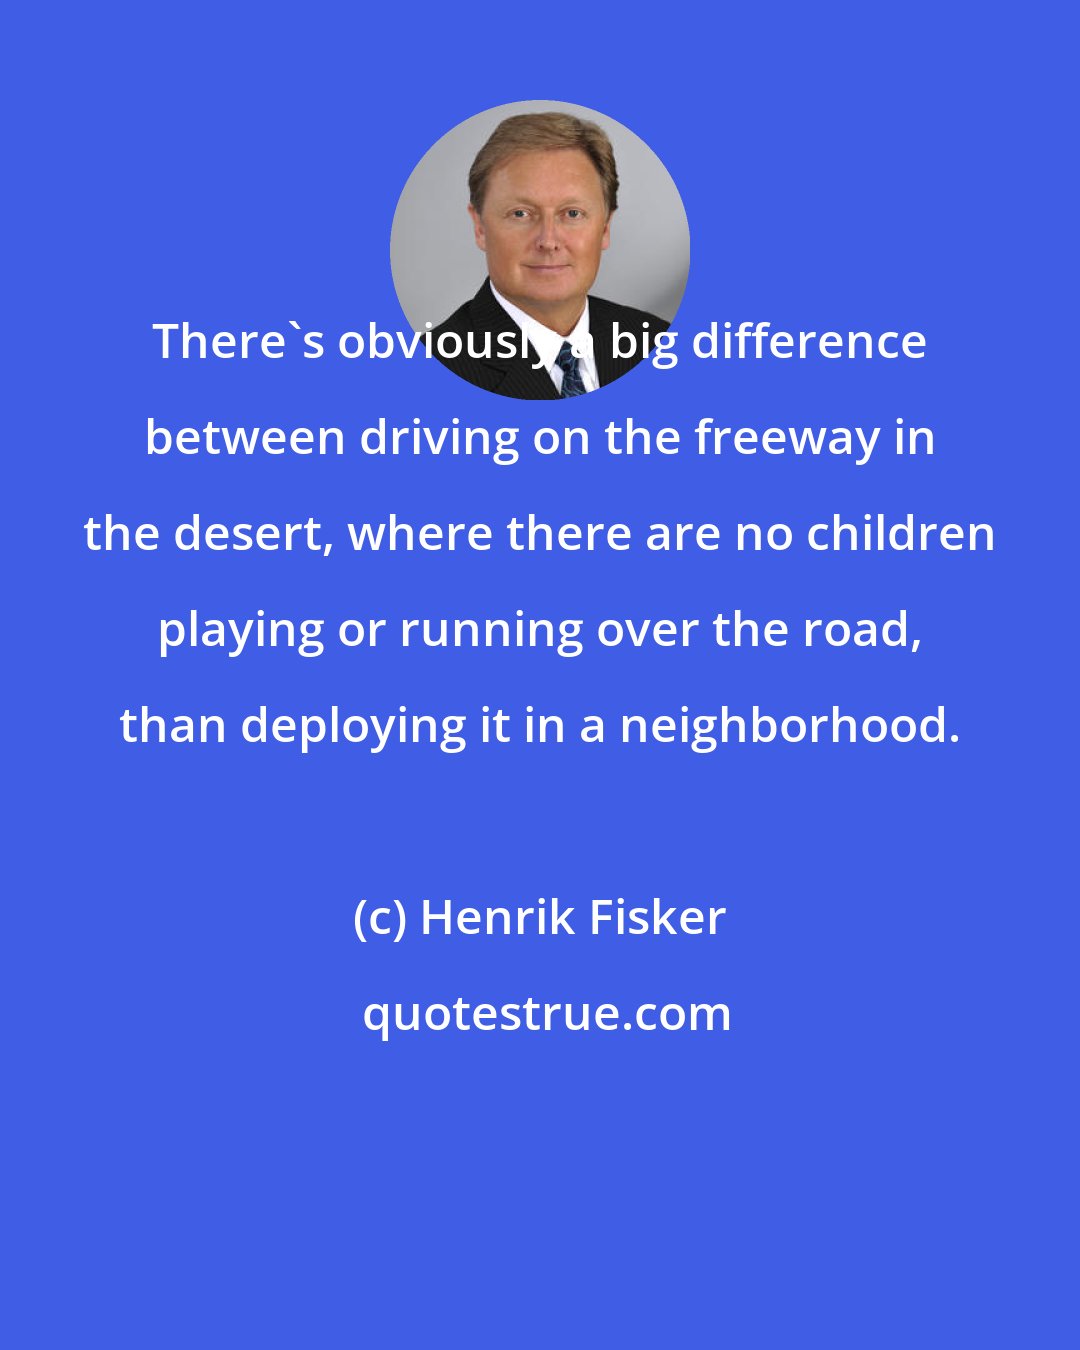 Henrik Fisker: There's obviously a big difference between driving on the freeway in the desert, where there are no children playing or running over the road, than deploying it in a neighborhood.